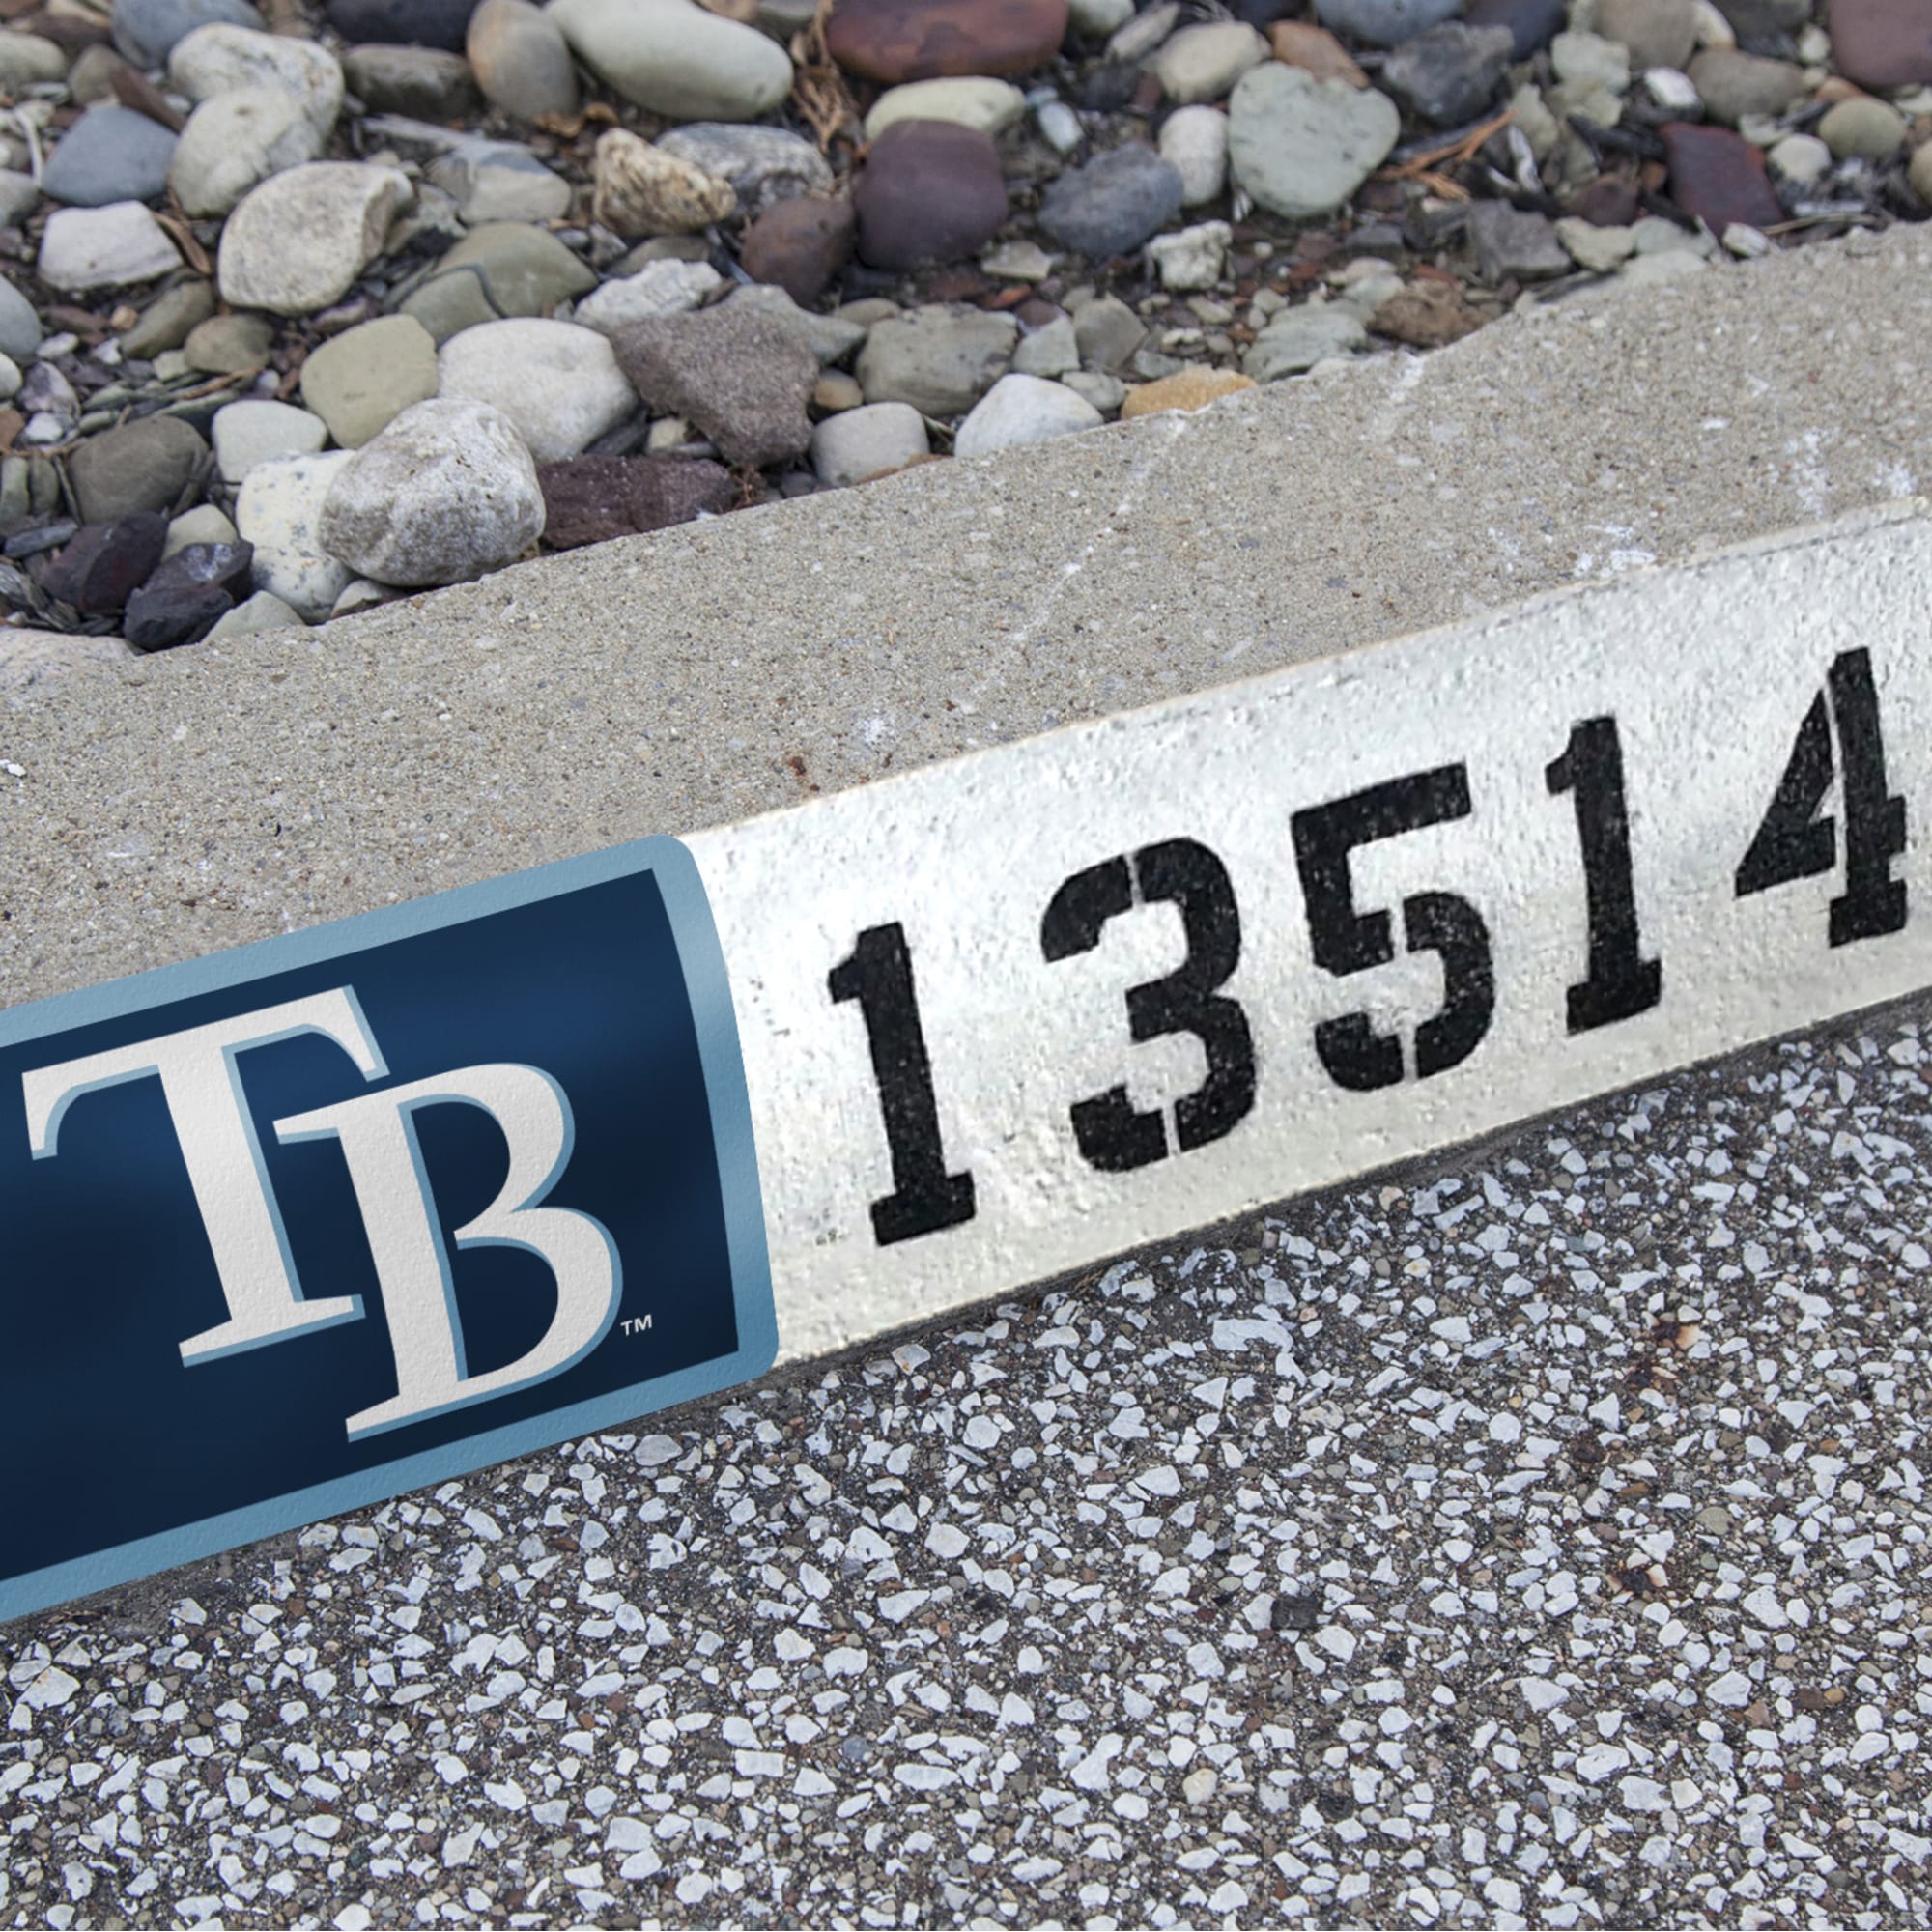 Tampa Bay Rays: Address Block - Officially Licensed MLB Outdoor Graphic 6.0"W x 8.0"H by Fathead | Wood/Aluminum